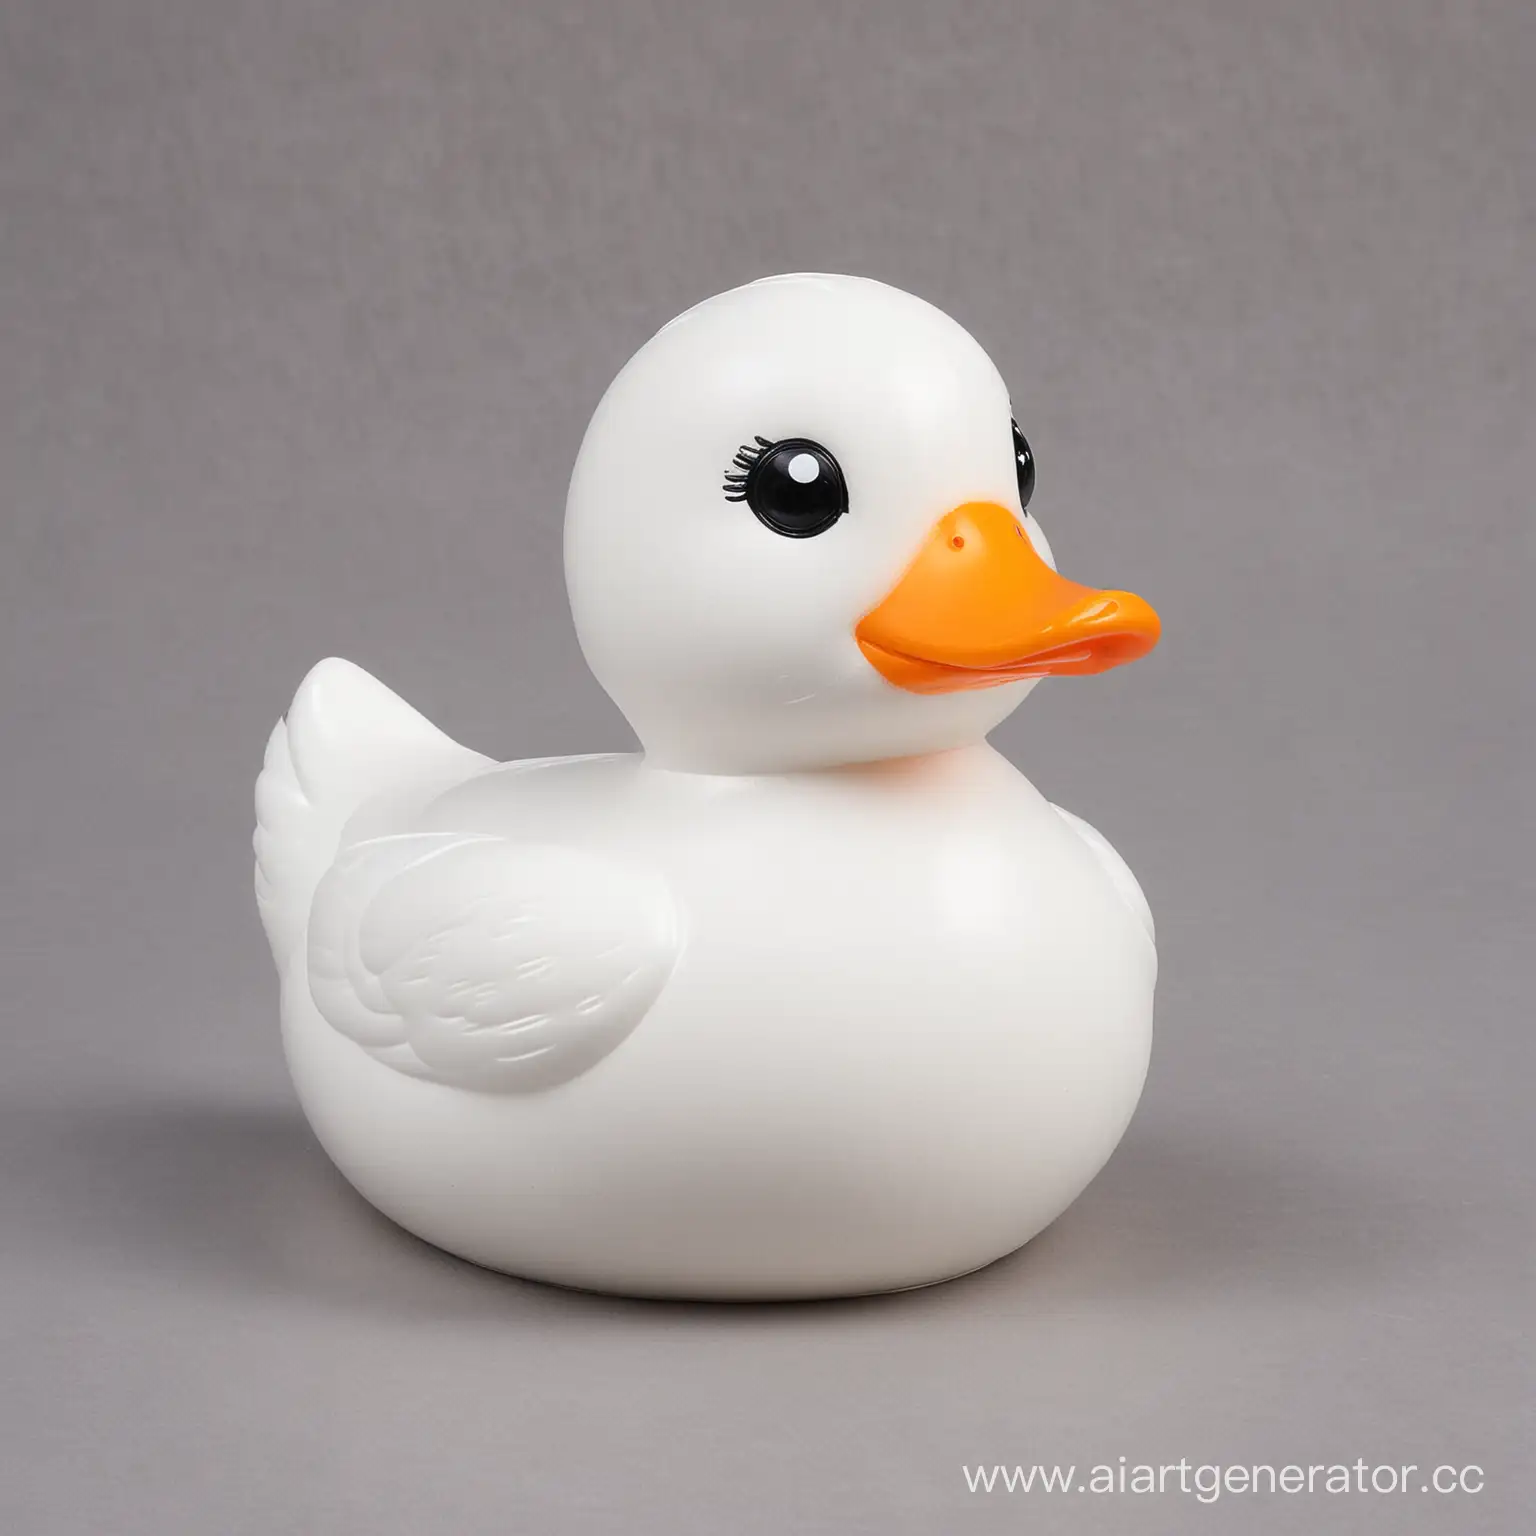 Giant-White-Toy-Duck-for-Playful-Decor-and-Fun